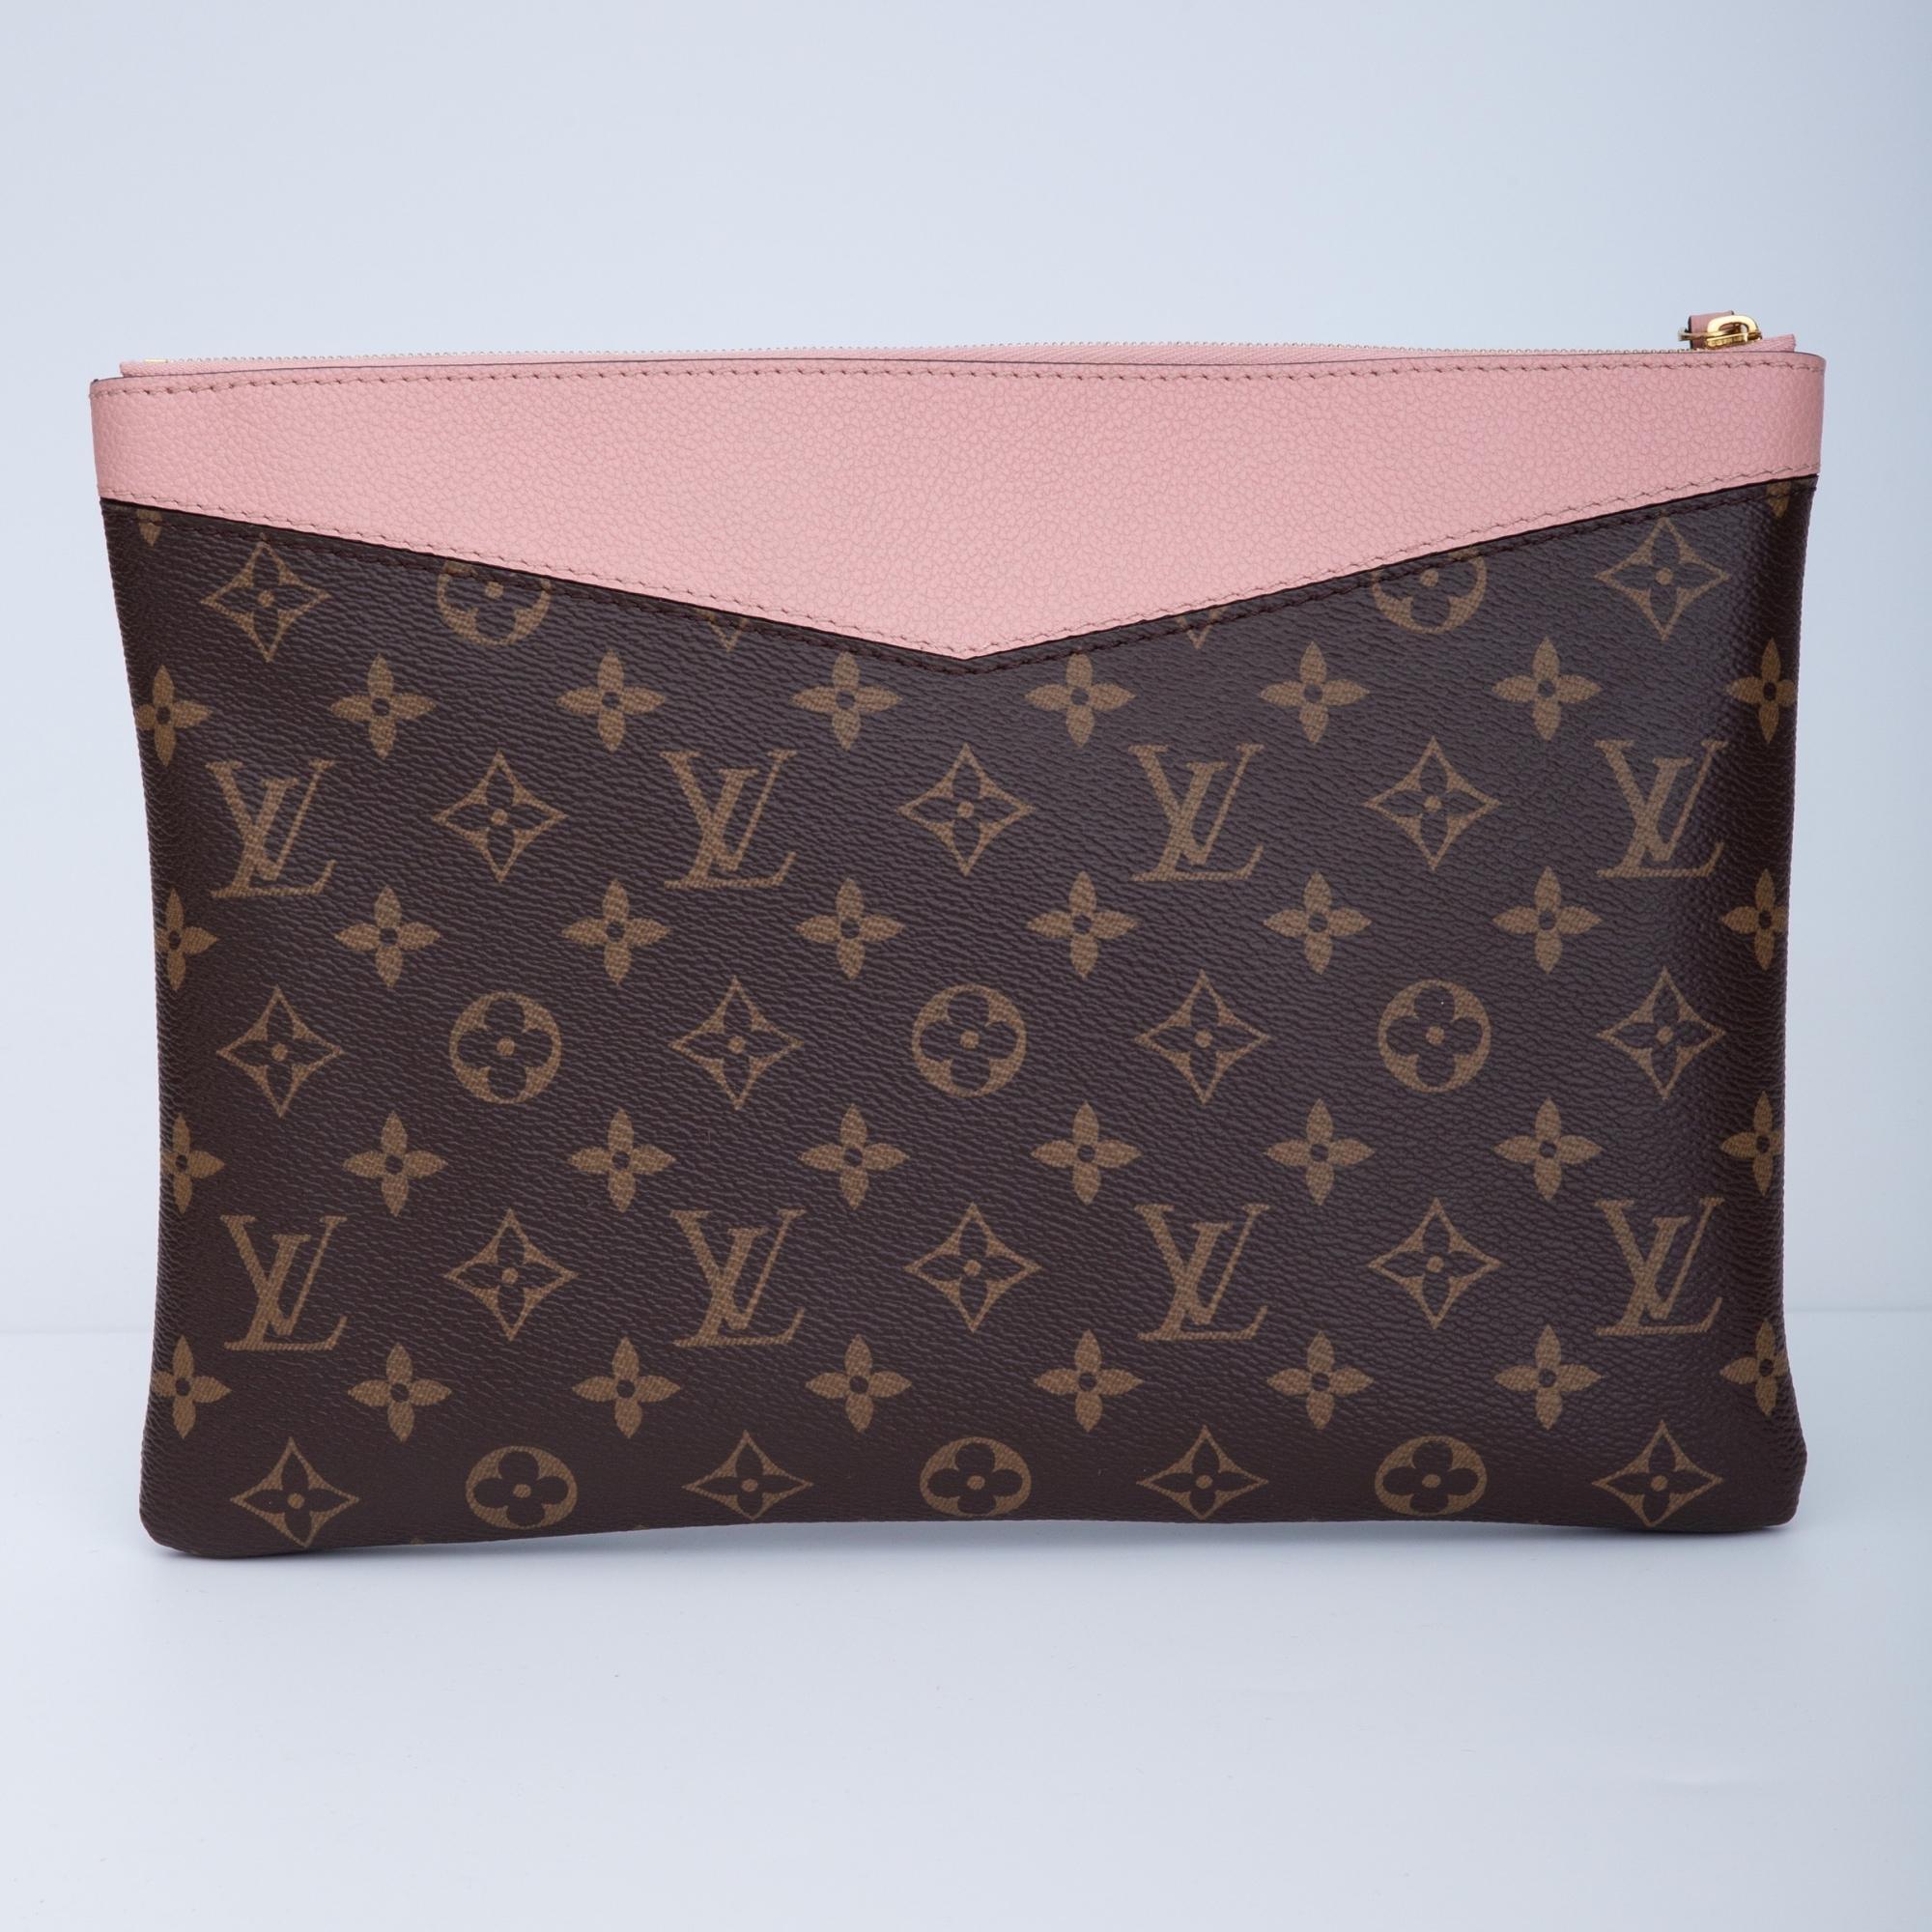 This pouch by Louis Vuitton is made with monogram canvas with subtly grained cowhide leather in rose poudre (pink). The bag can be carried on it’s own or slipped into a larger bag. The bag features top zip closure, matching pink microfiber lining. 1